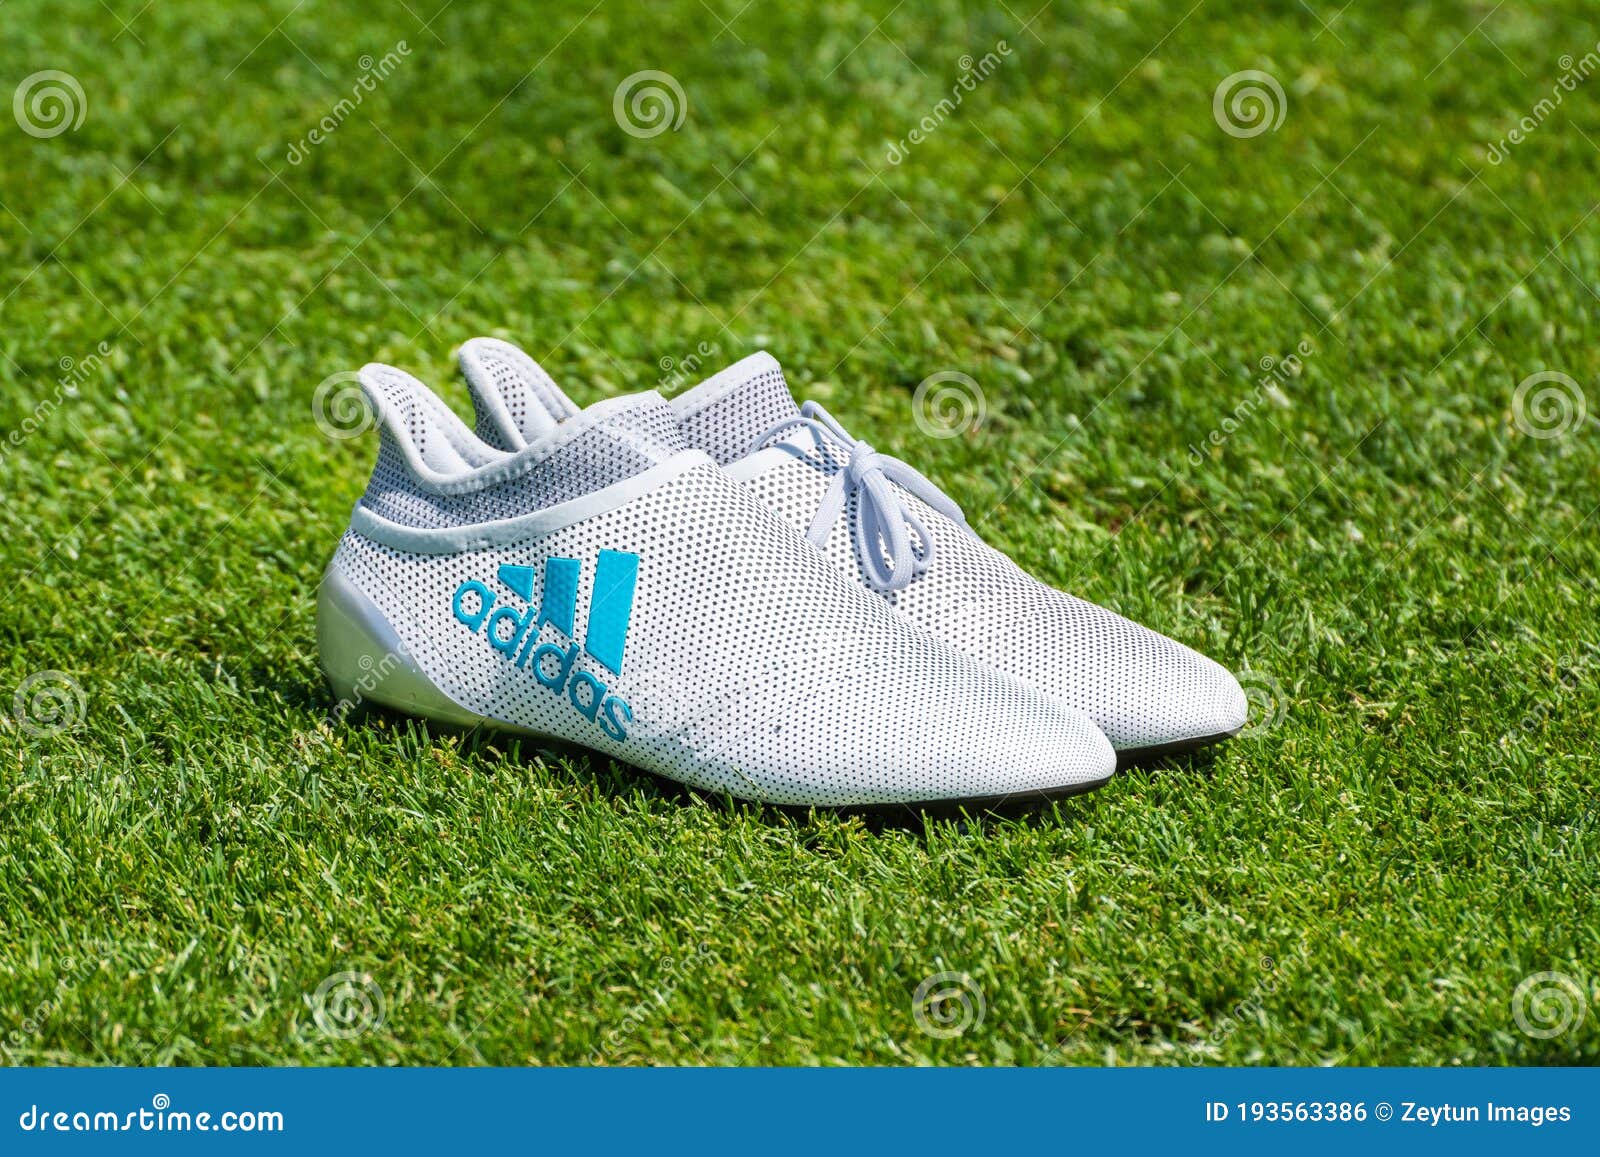 White Adidas Football on Green Grass Editorial Photo - Image of decoration, grass: 193563386